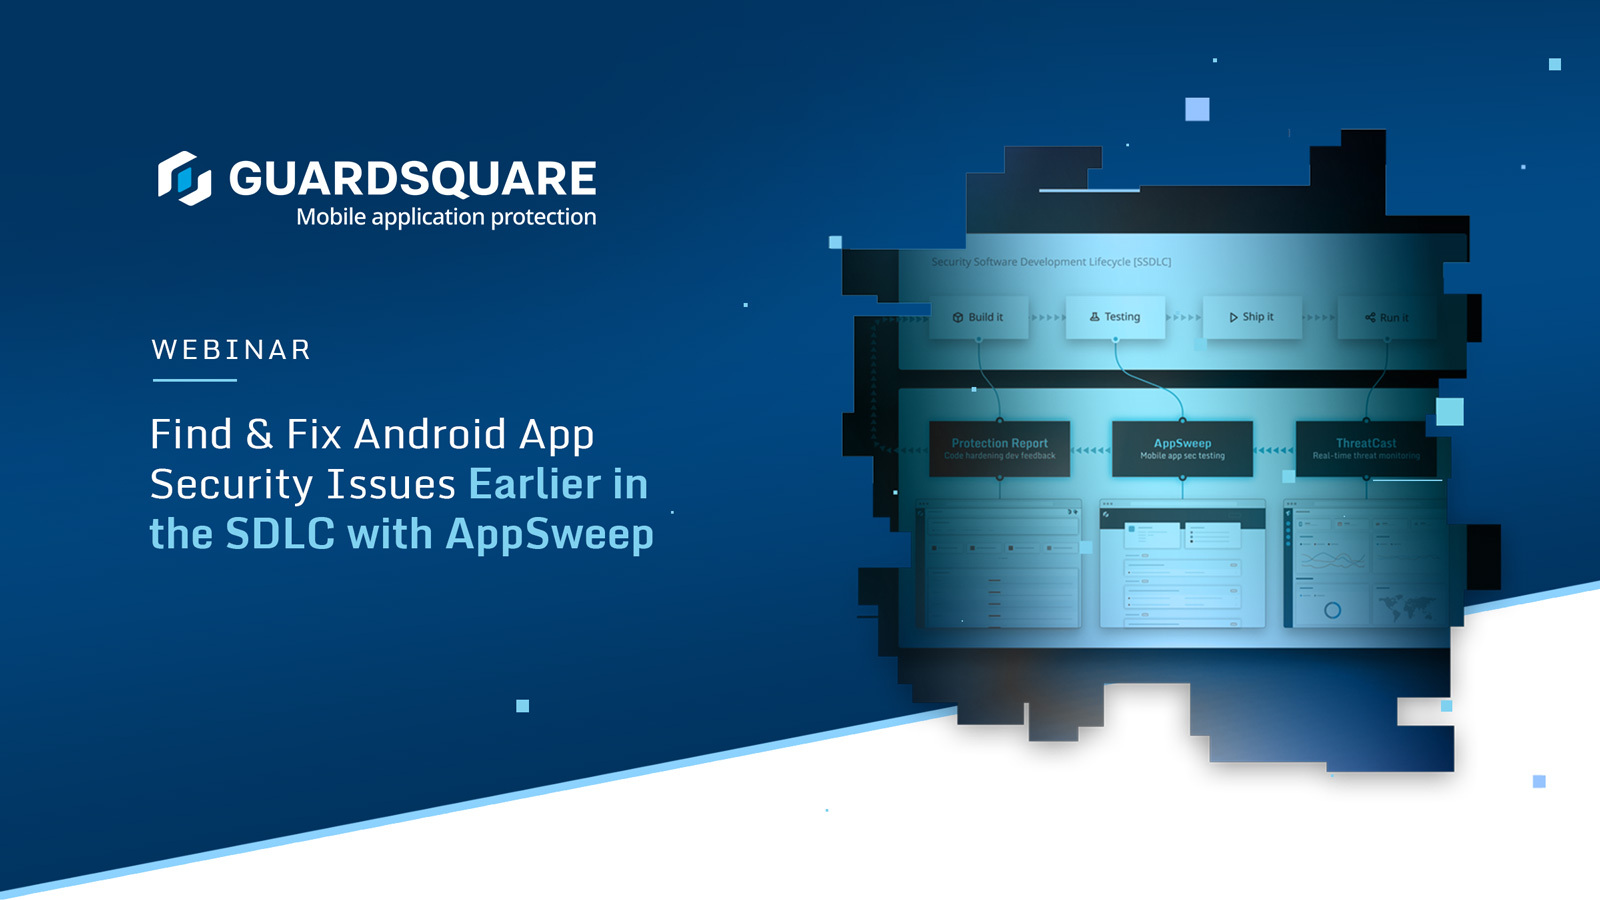 Find_Fix_Android_App_Security_Issues_Earlier_in_the_SDLC_with_AppSweep